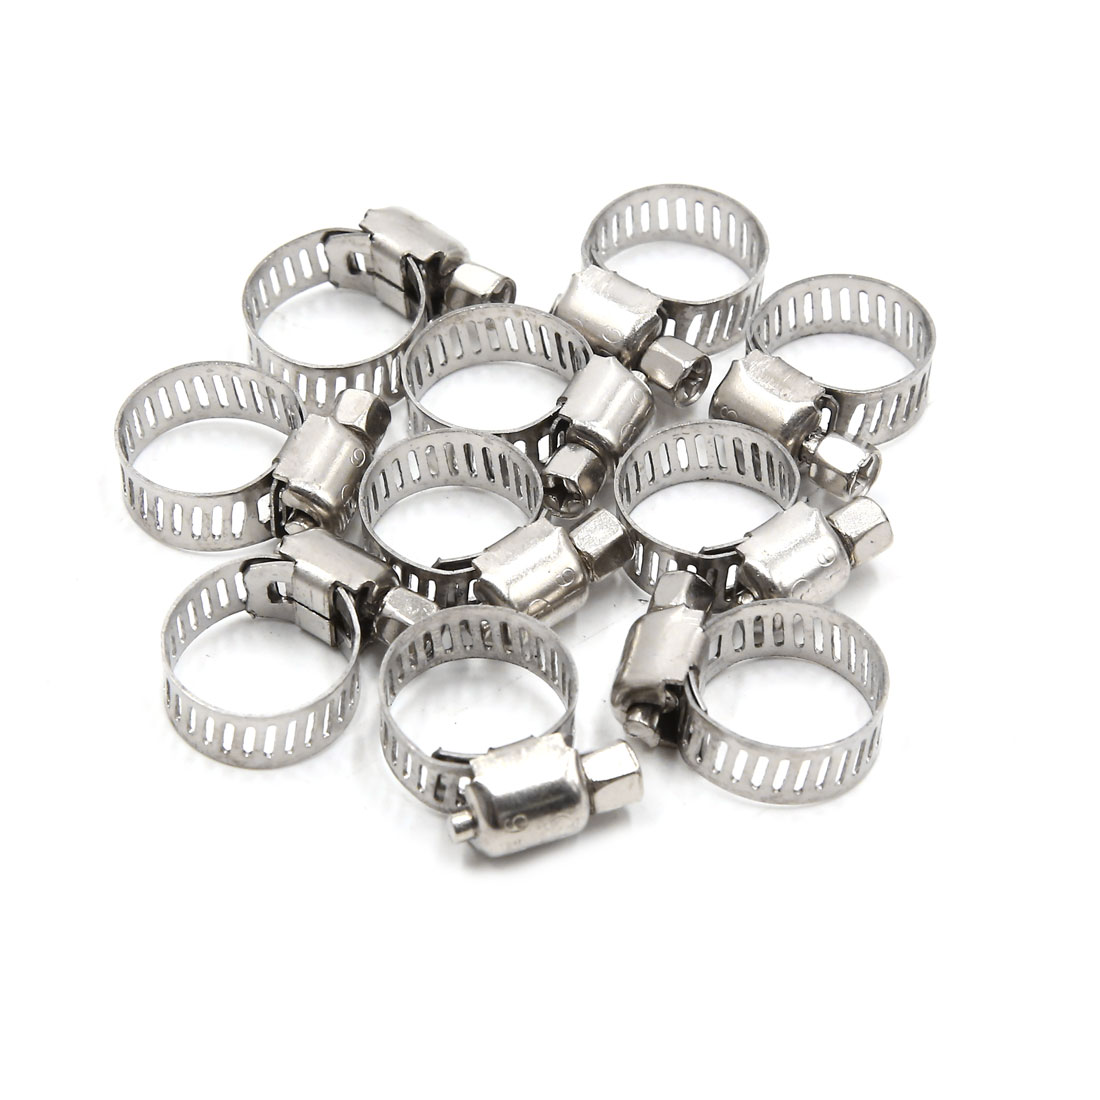 TJ Longda 10 Pieces Earless Low Profile CV Boot Hose Clamps 1.2 or 30.5mm Stainless Steel 